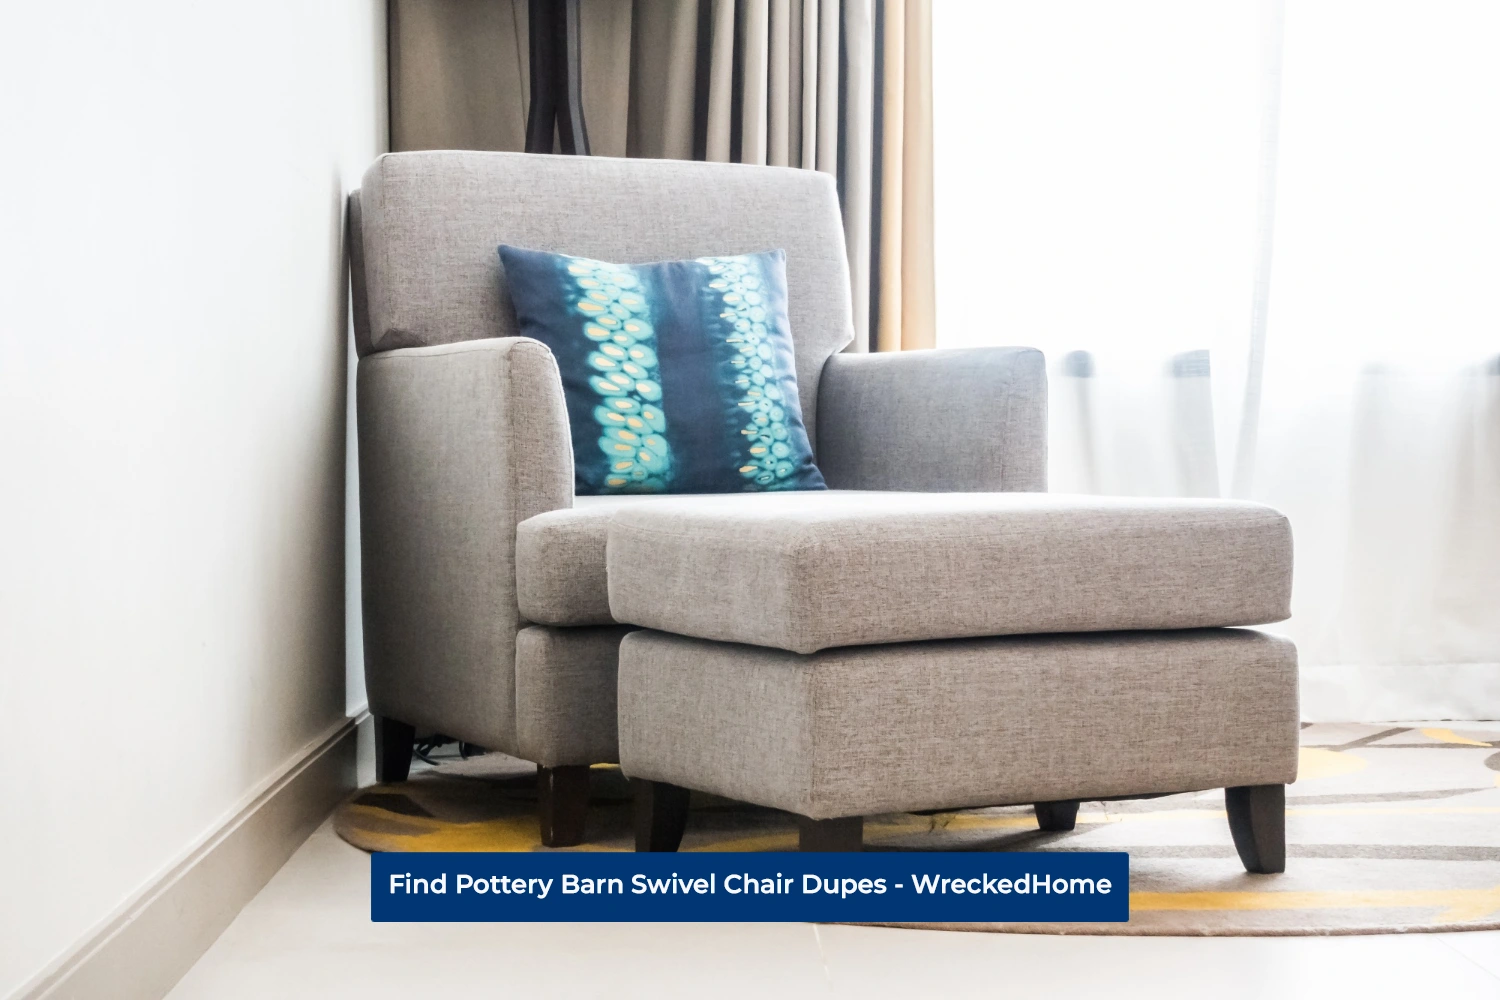 Pottery Barn Swivel Chair Dupes